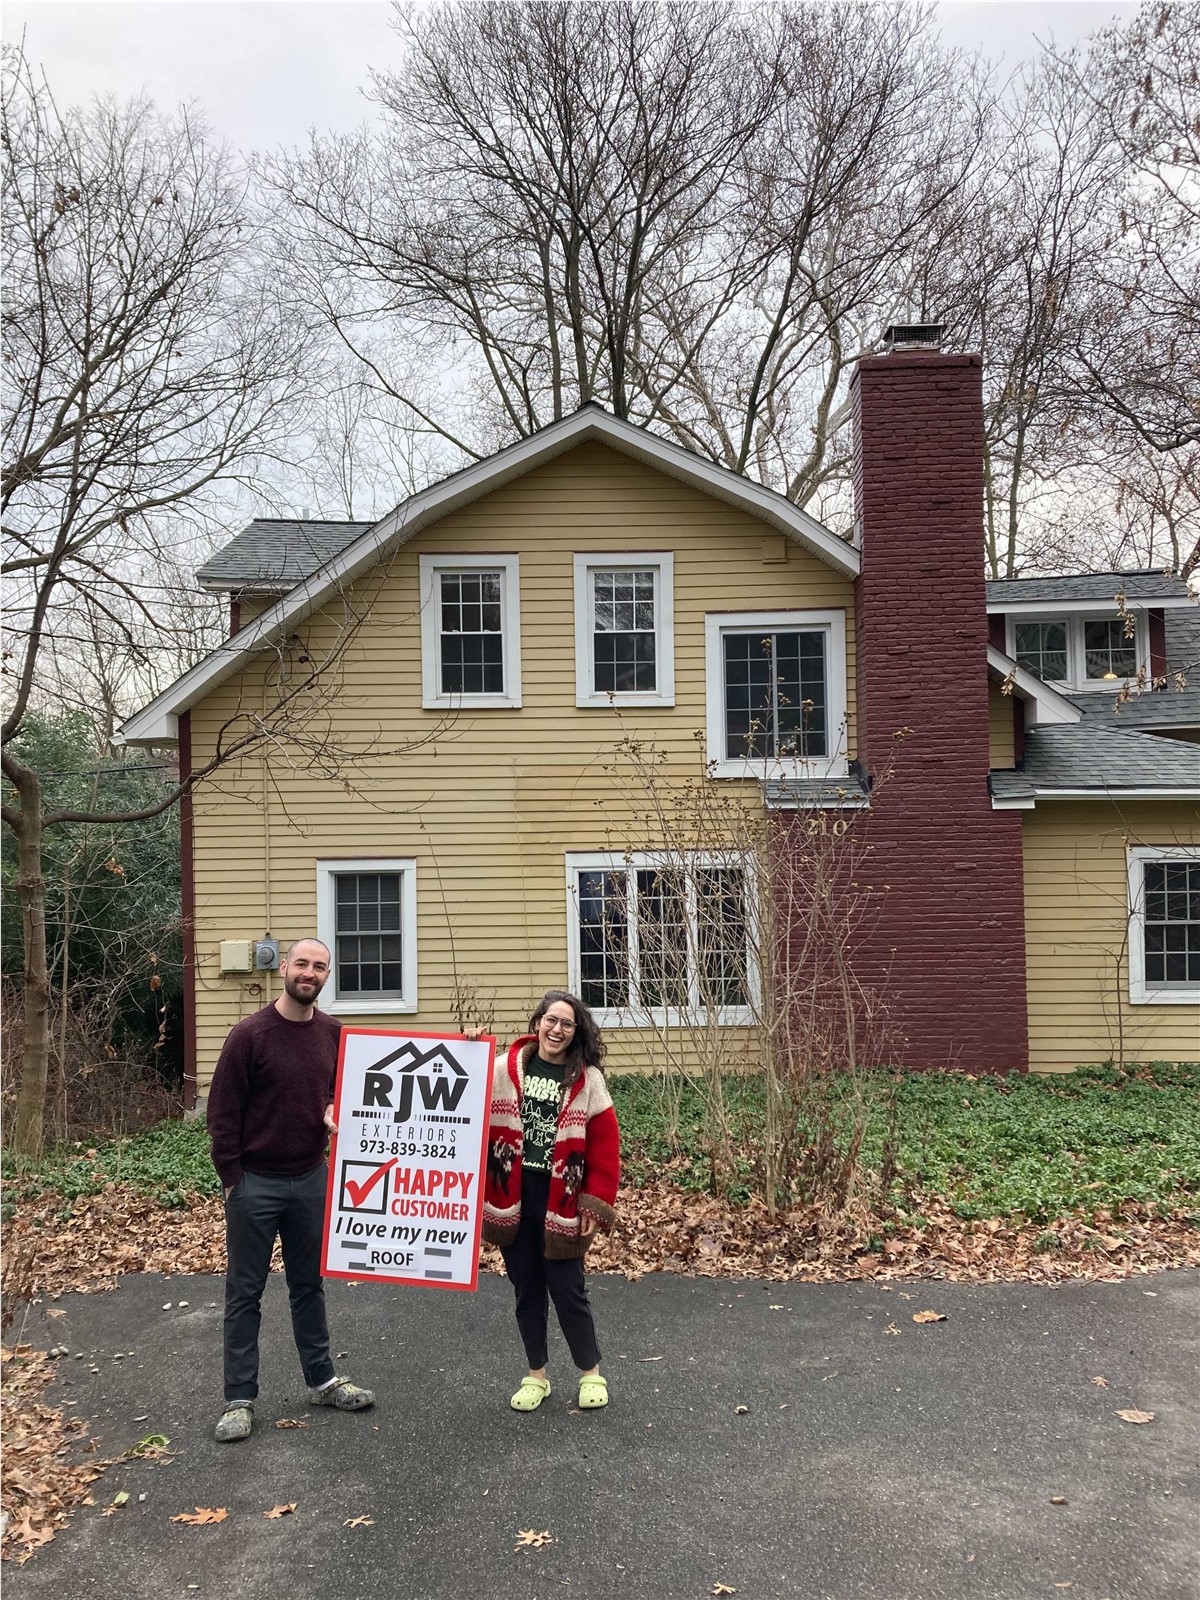 Two people standing in front of a house with a sign.